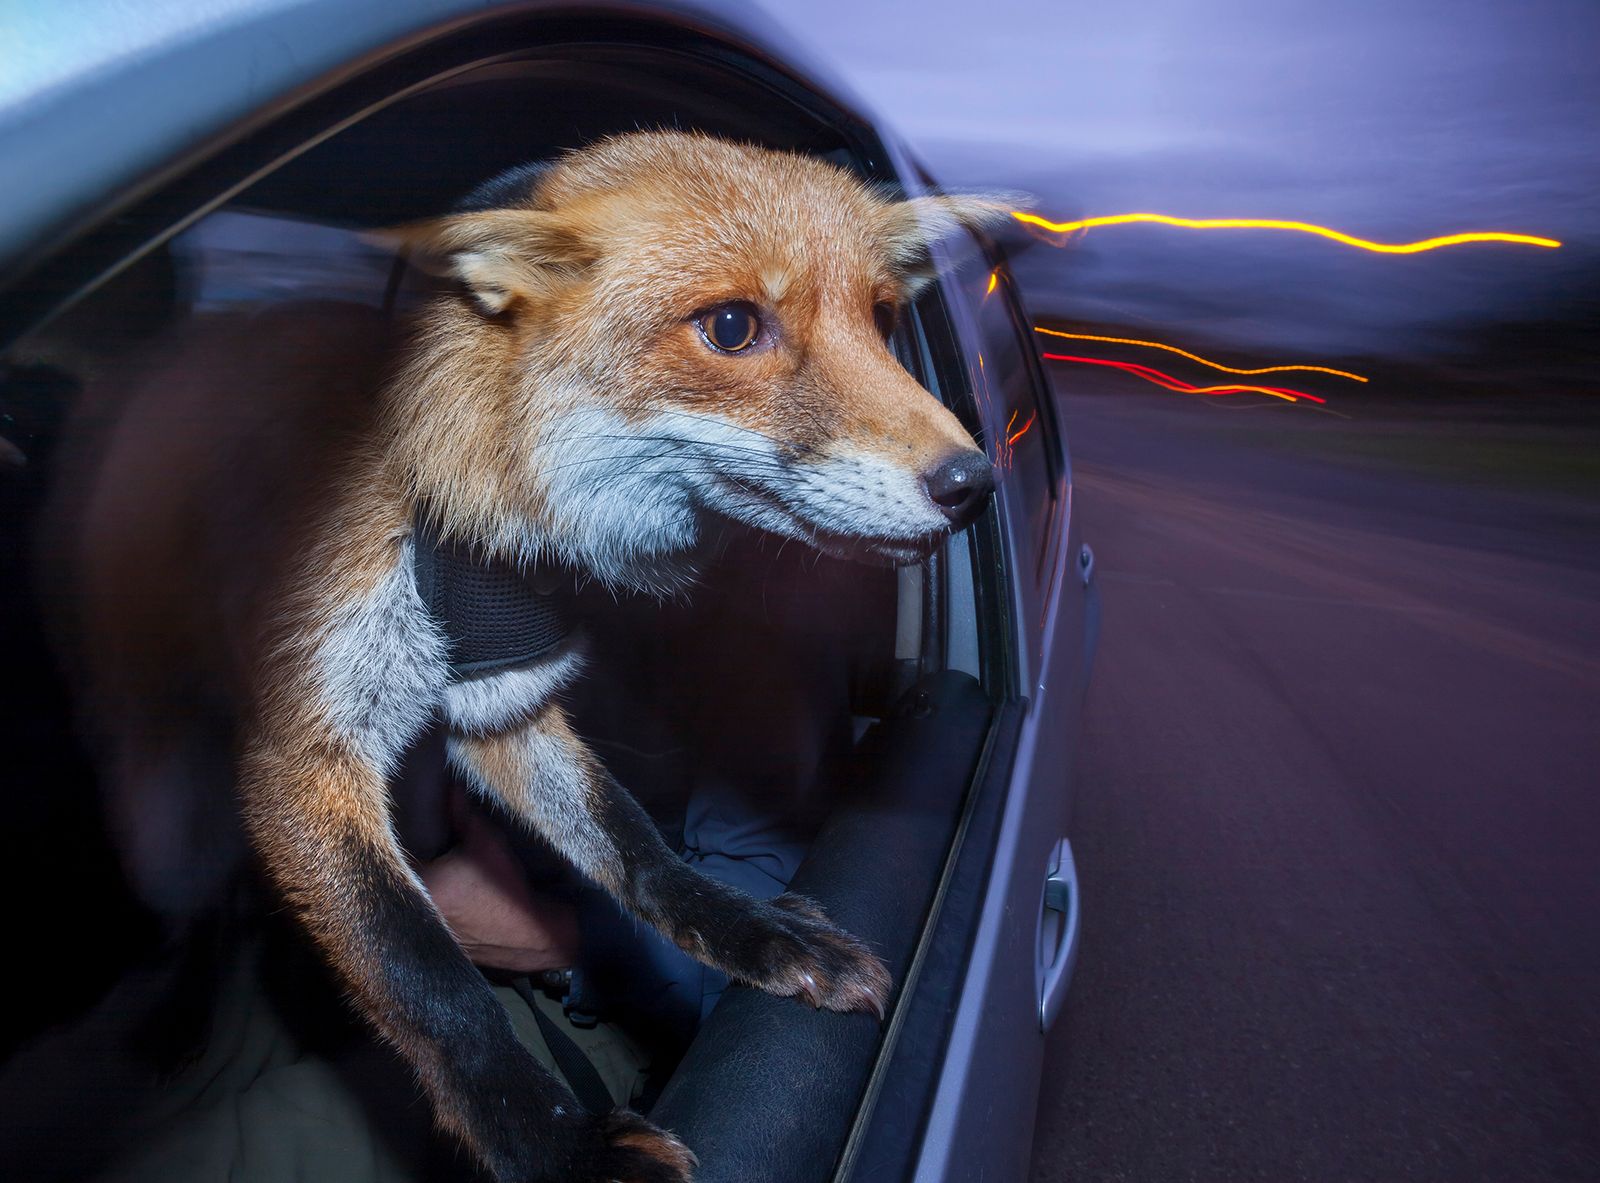 © Neil Aldridge - Image from the Living with Foxes photography project